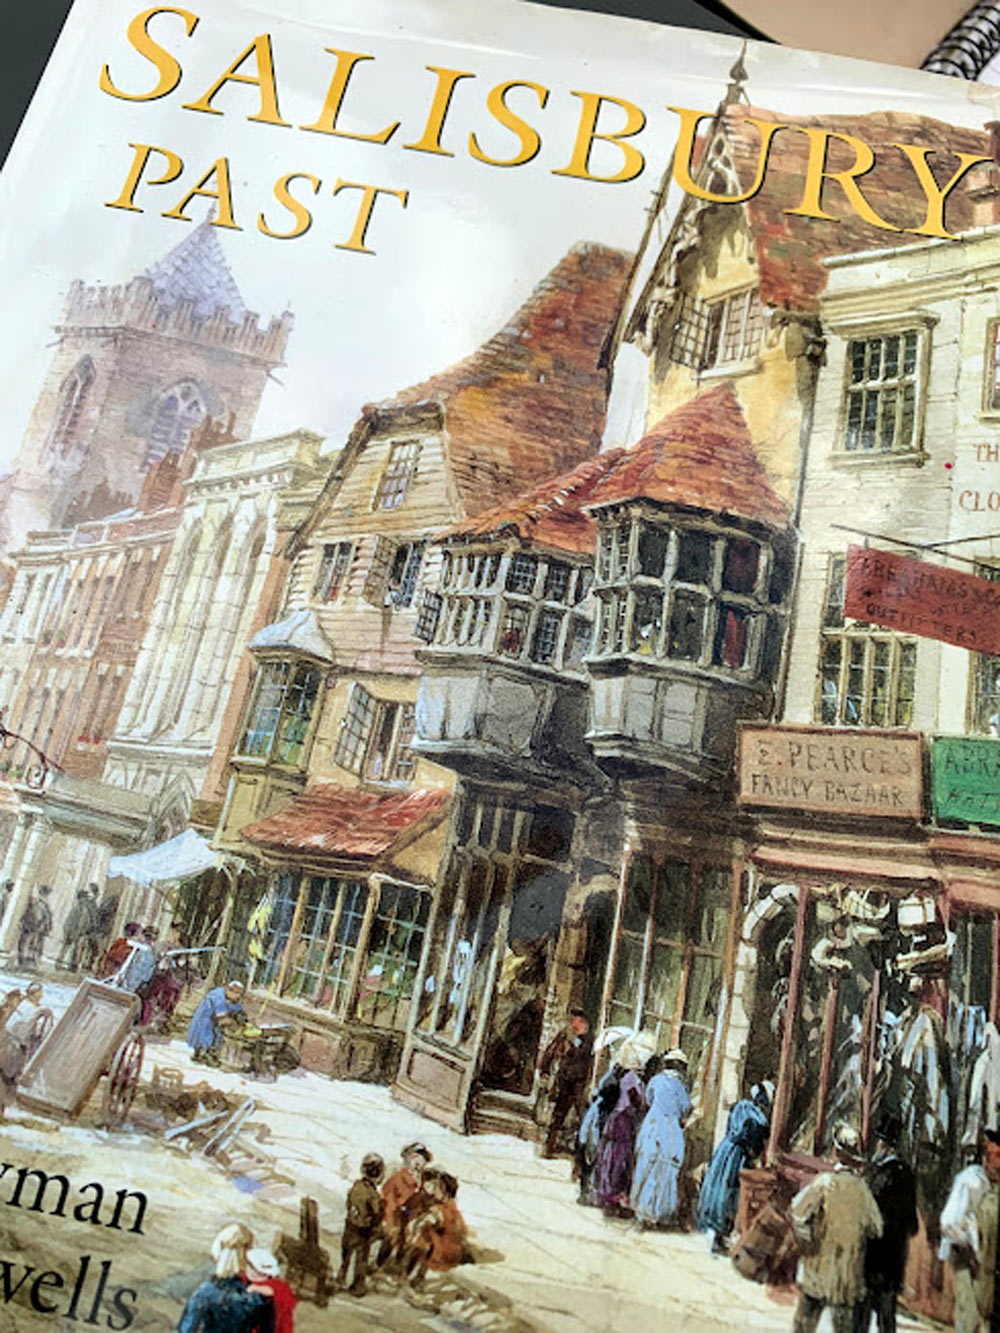 Rayner’s work on the cover of Salisbury Past